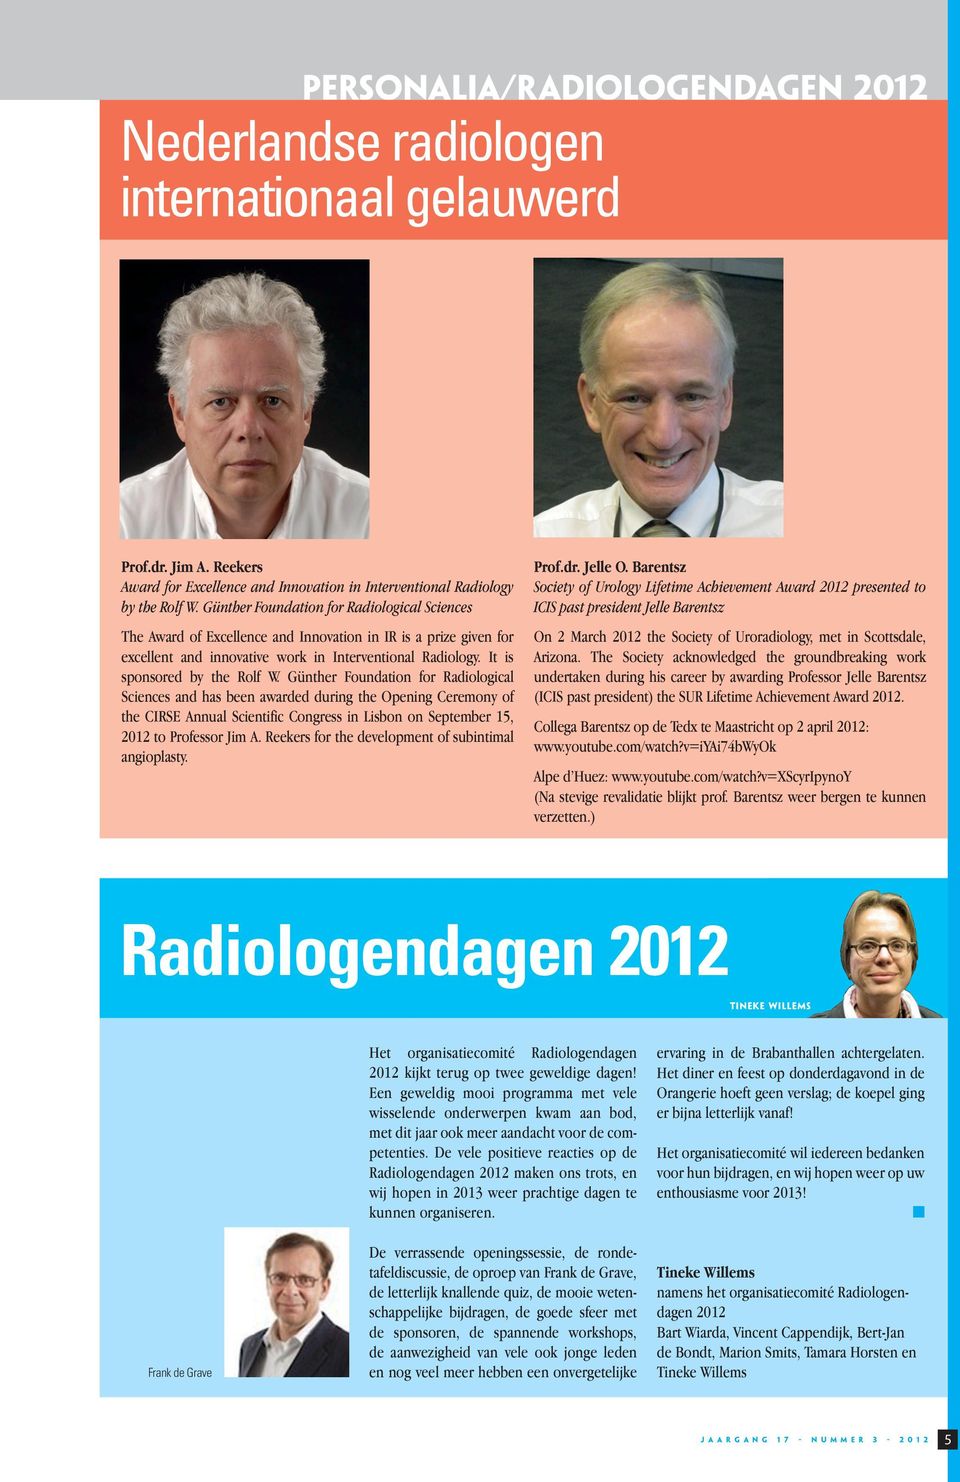 Günther Foundation for Radiological Sciences and has been awarded during the Opening Ceremony of the CIRSE Annual Scientific Congress in Lisbon on September 15, 2012 to Professor Jim A.